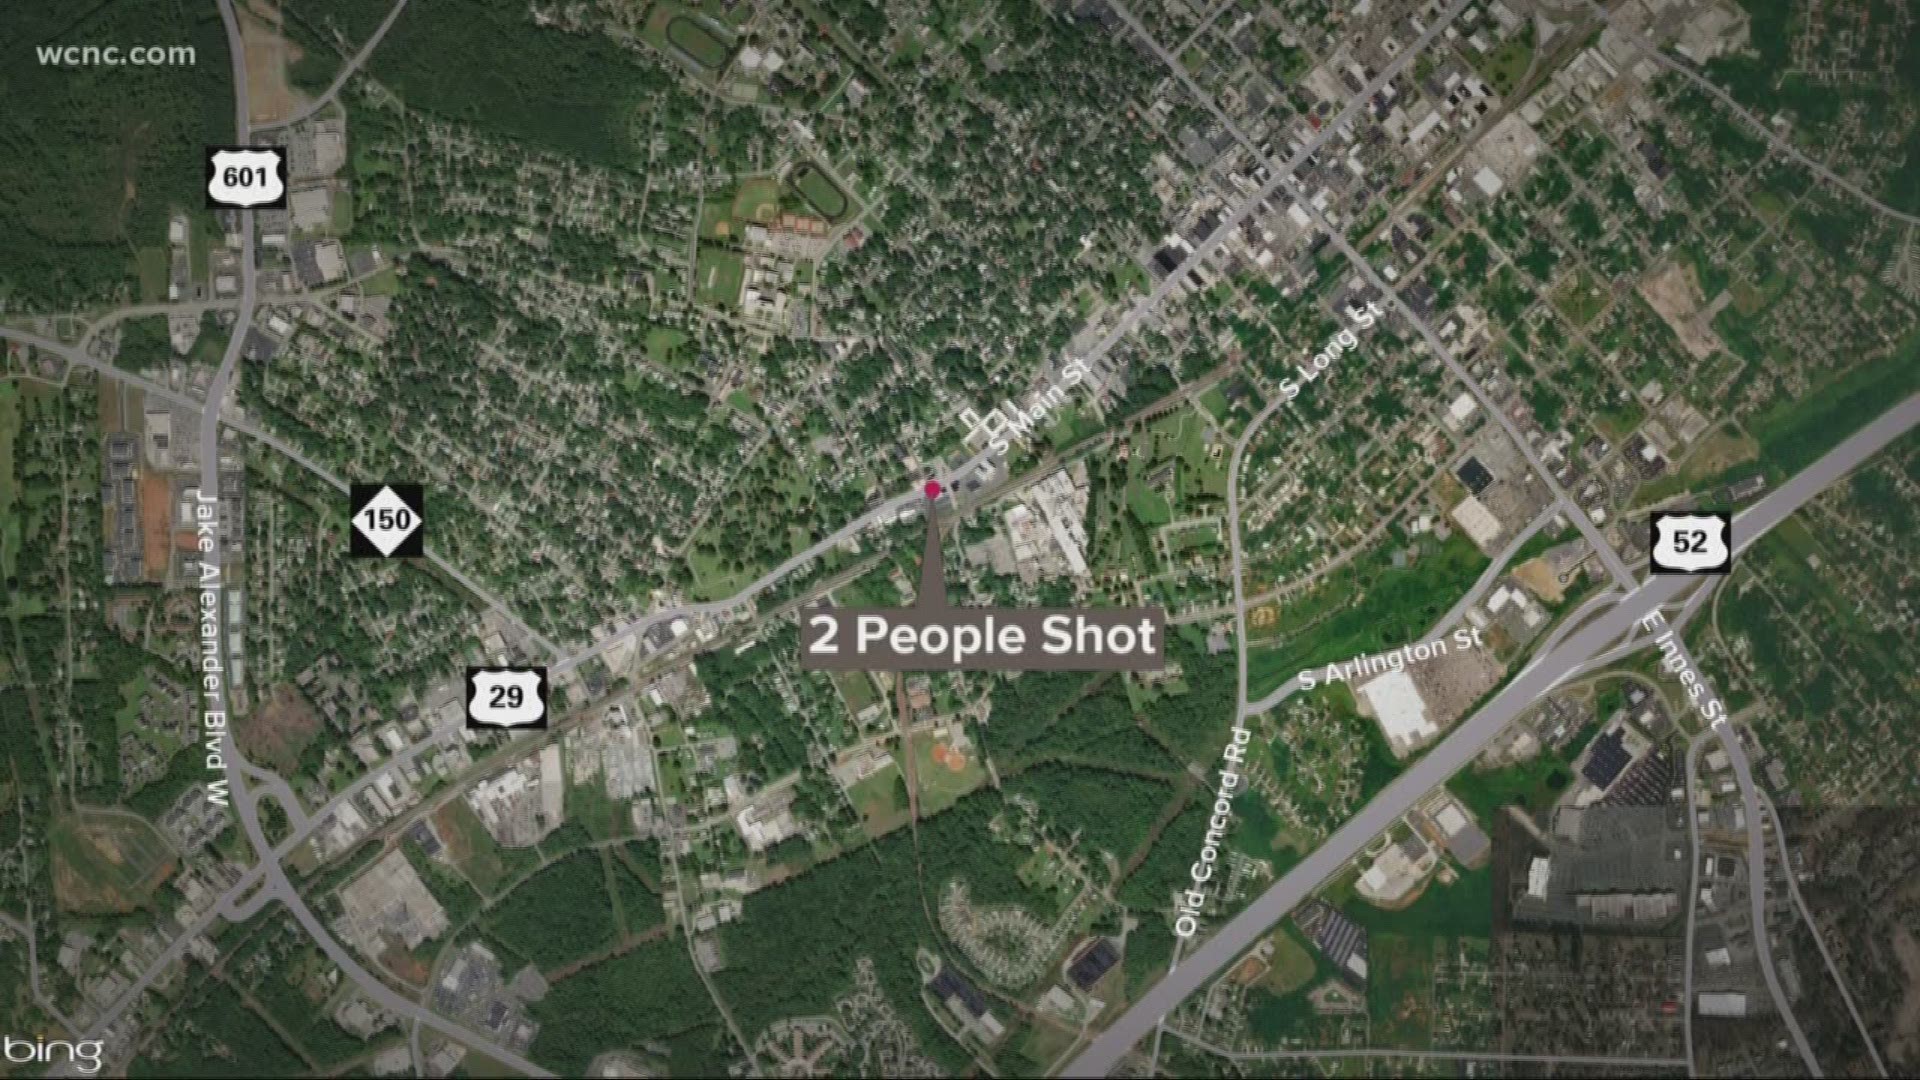 Police say the two teens were shot after an altercation at a party just after 1:30 a.m. Sunday.